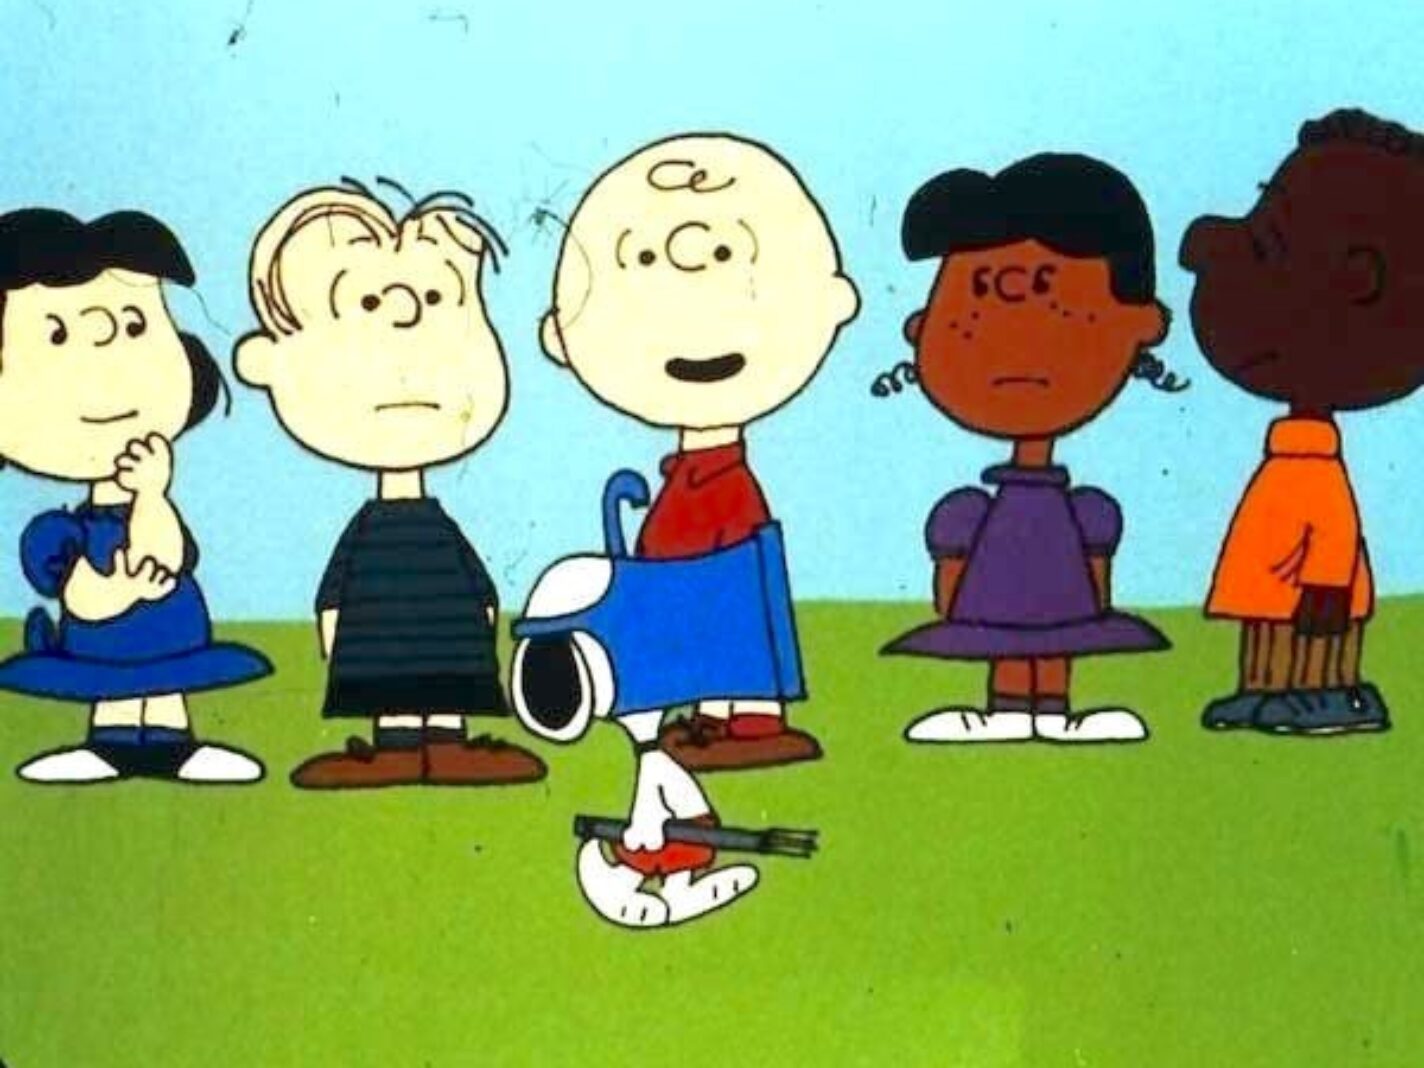 Meet Dolores & José, the Latine 'Peanuts' Characters You Never Knew Existed